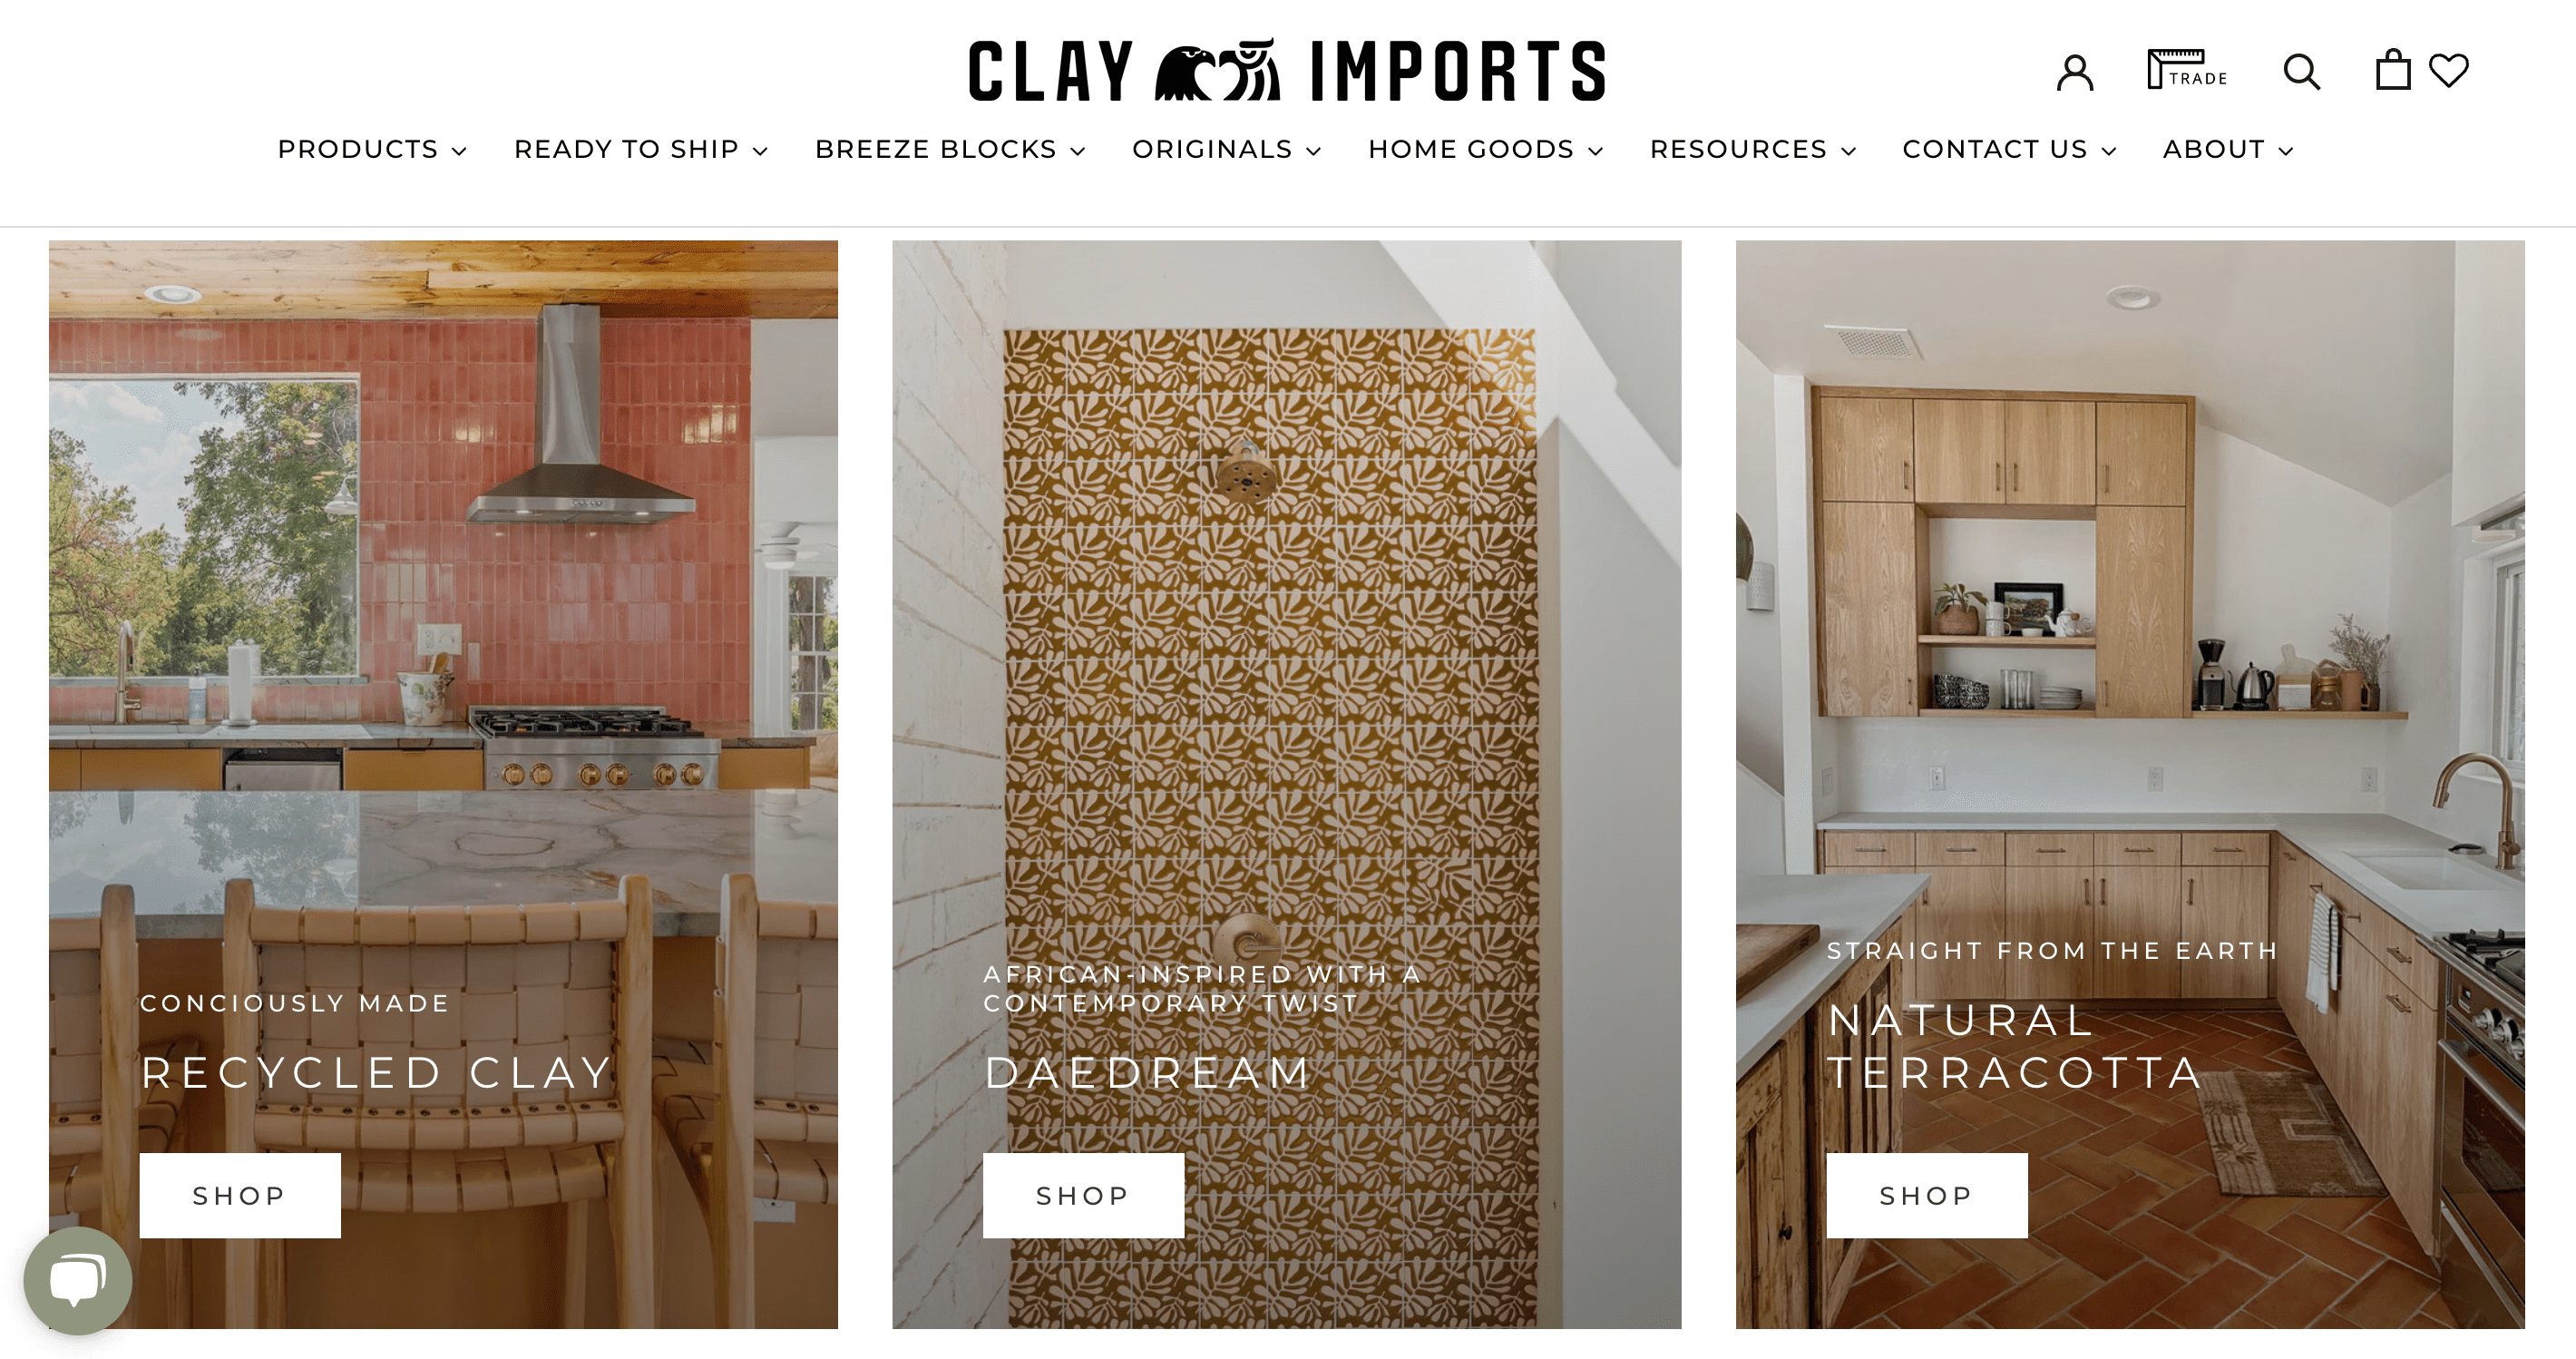 clayimports.com